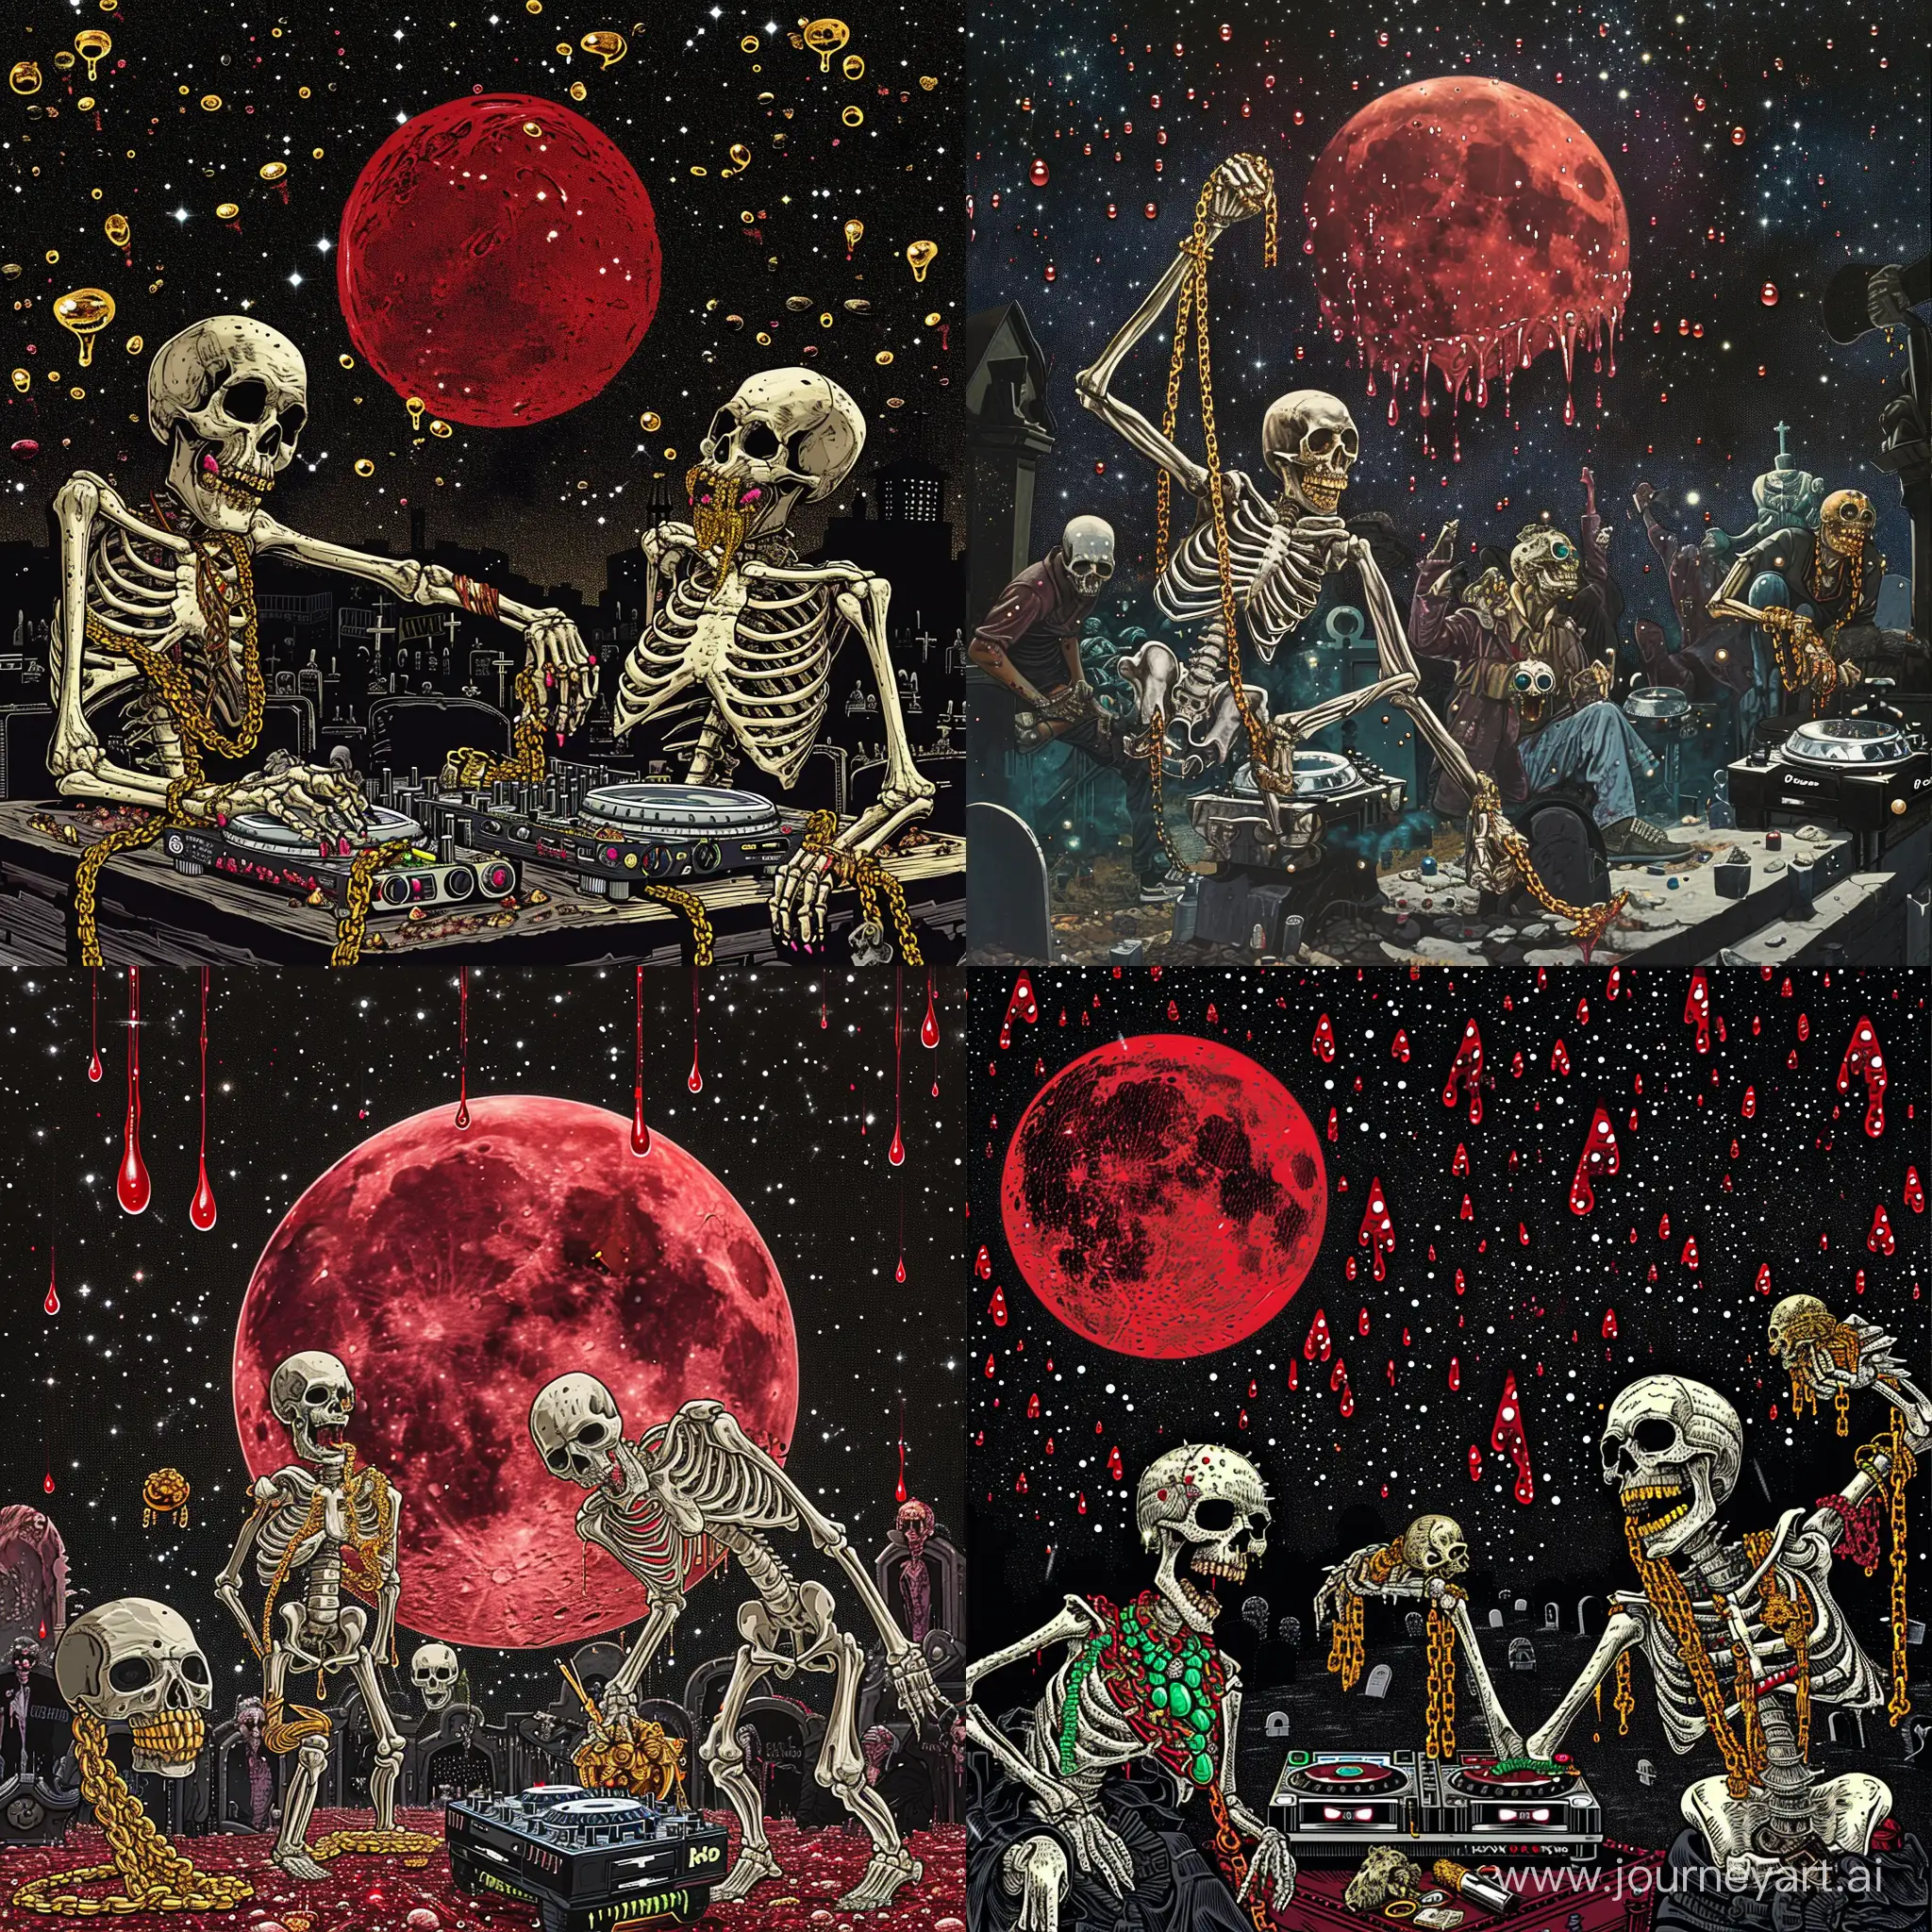 Nighttime-HipHop-Extravaganza-DJ-Skeleton-Spins-Beats-Under-the-Red-Moon